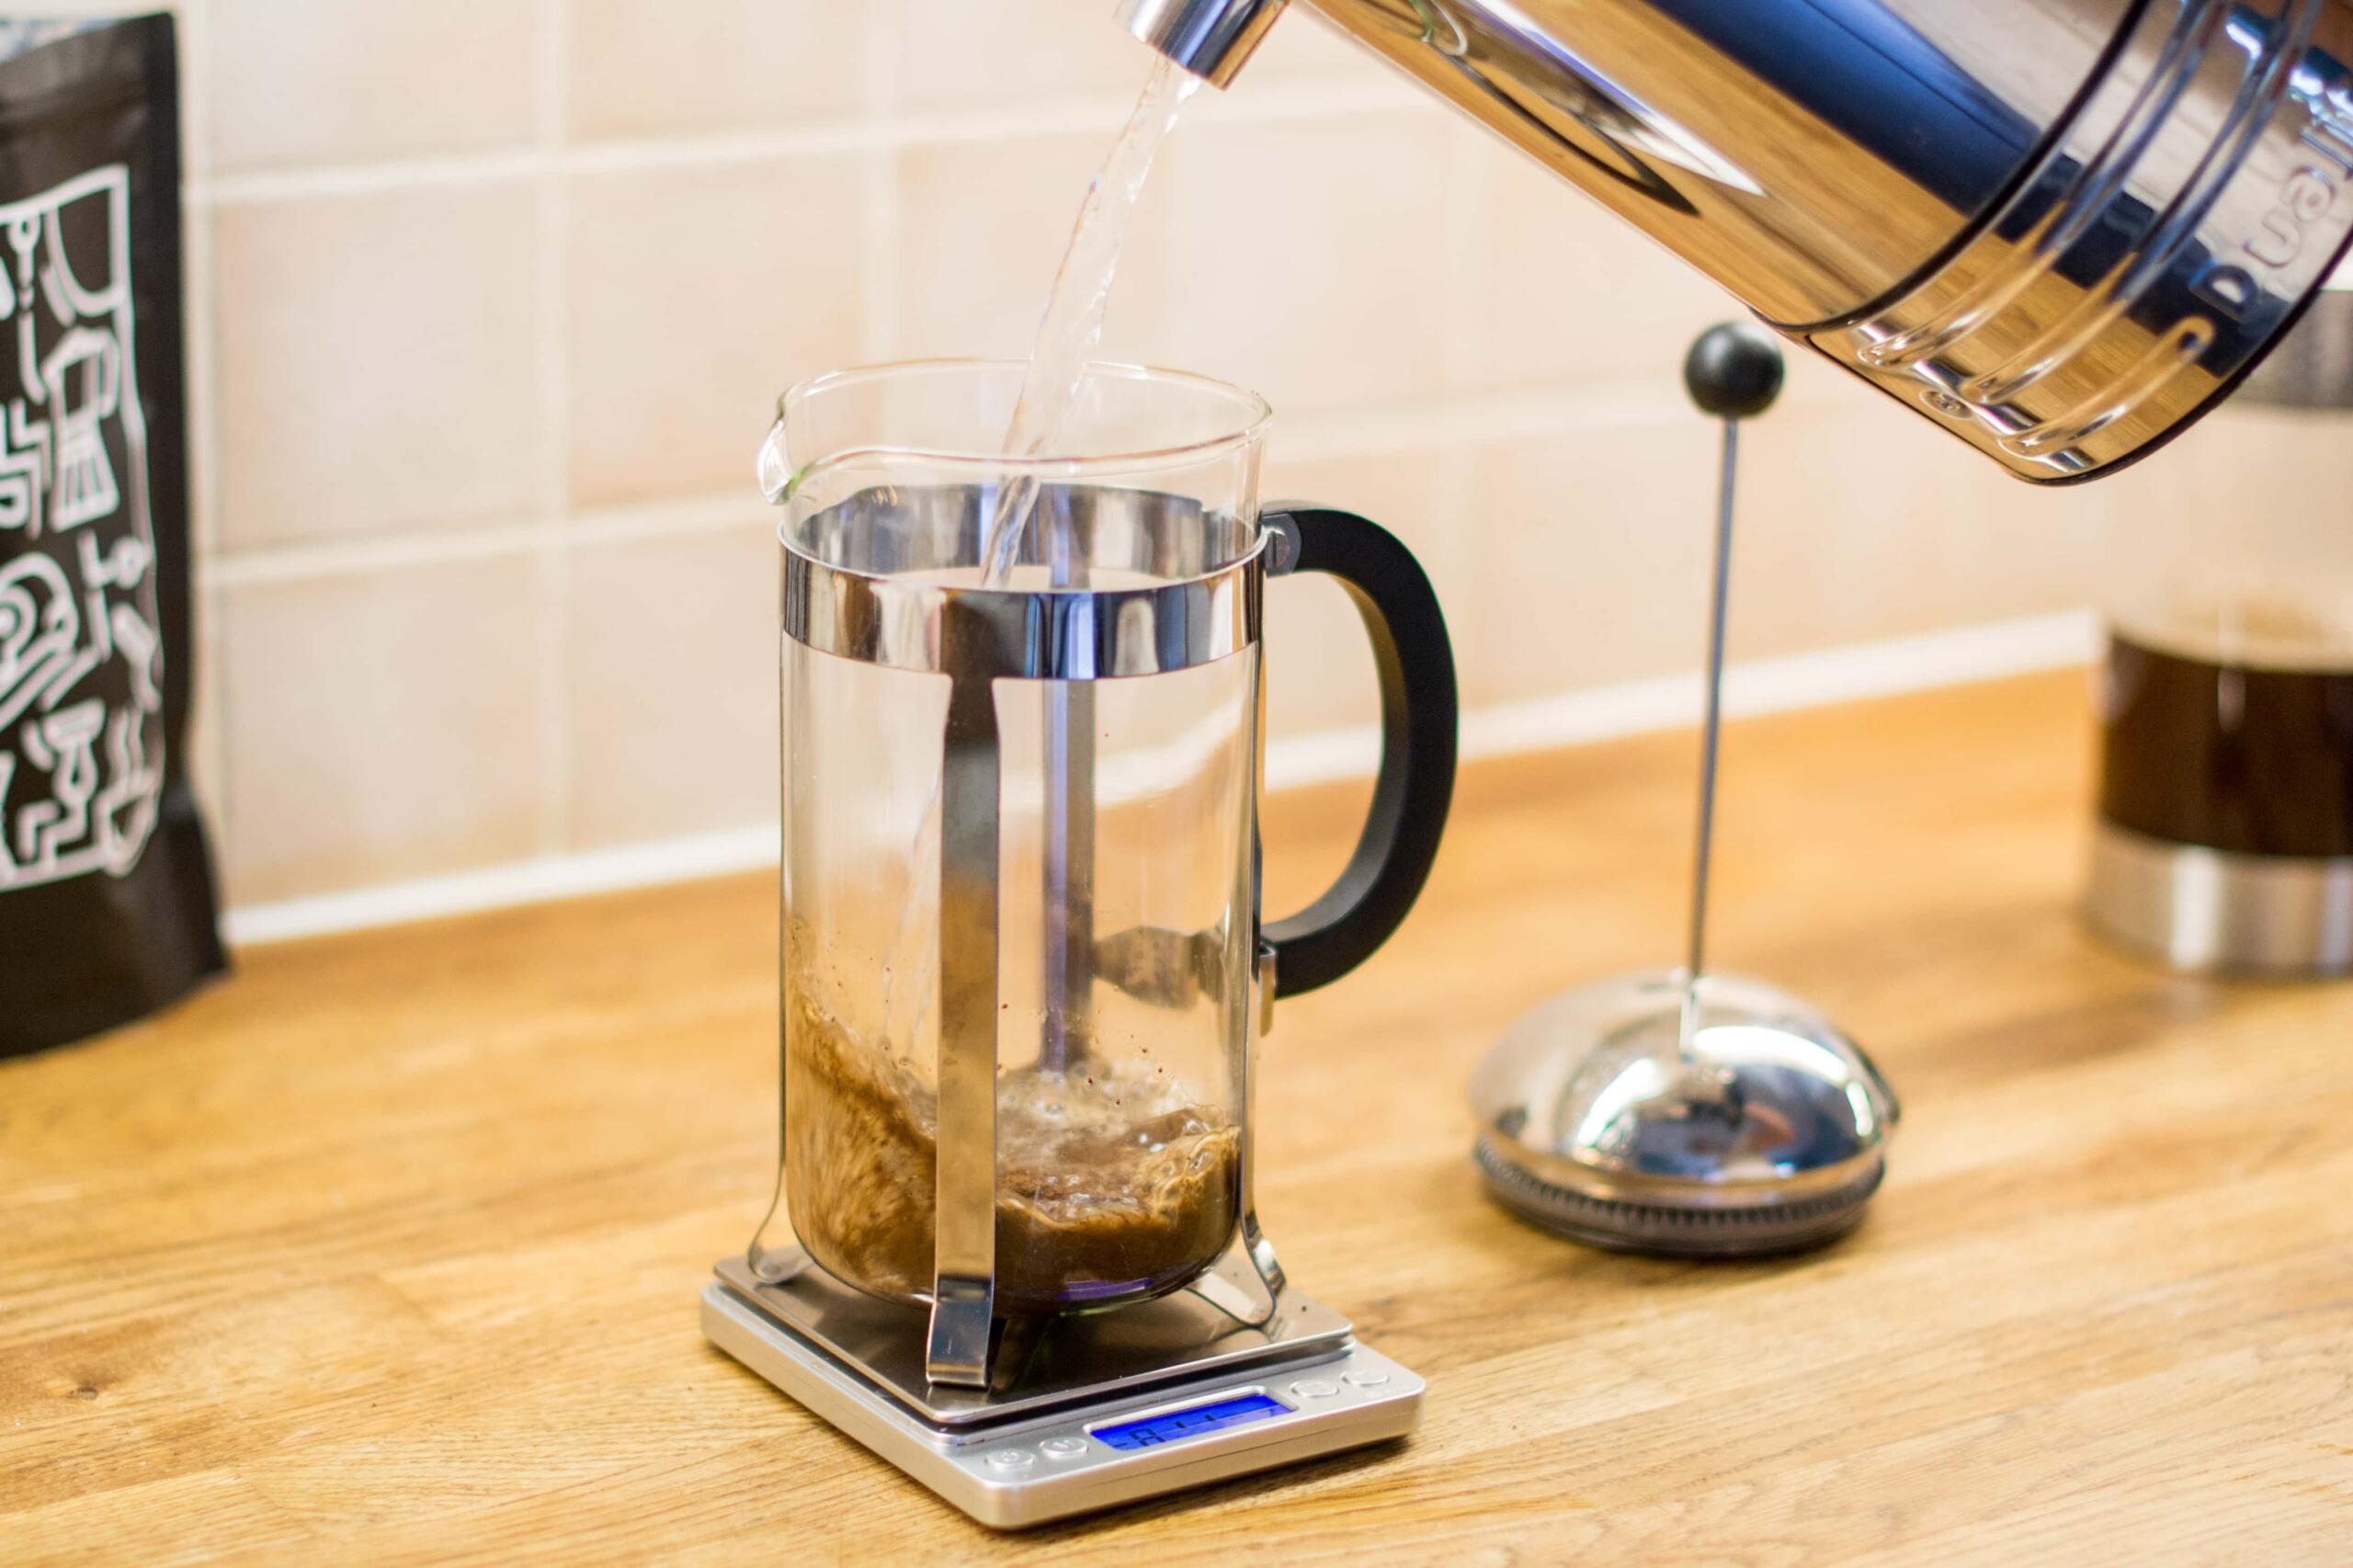 pouring hot water into a cafetiere